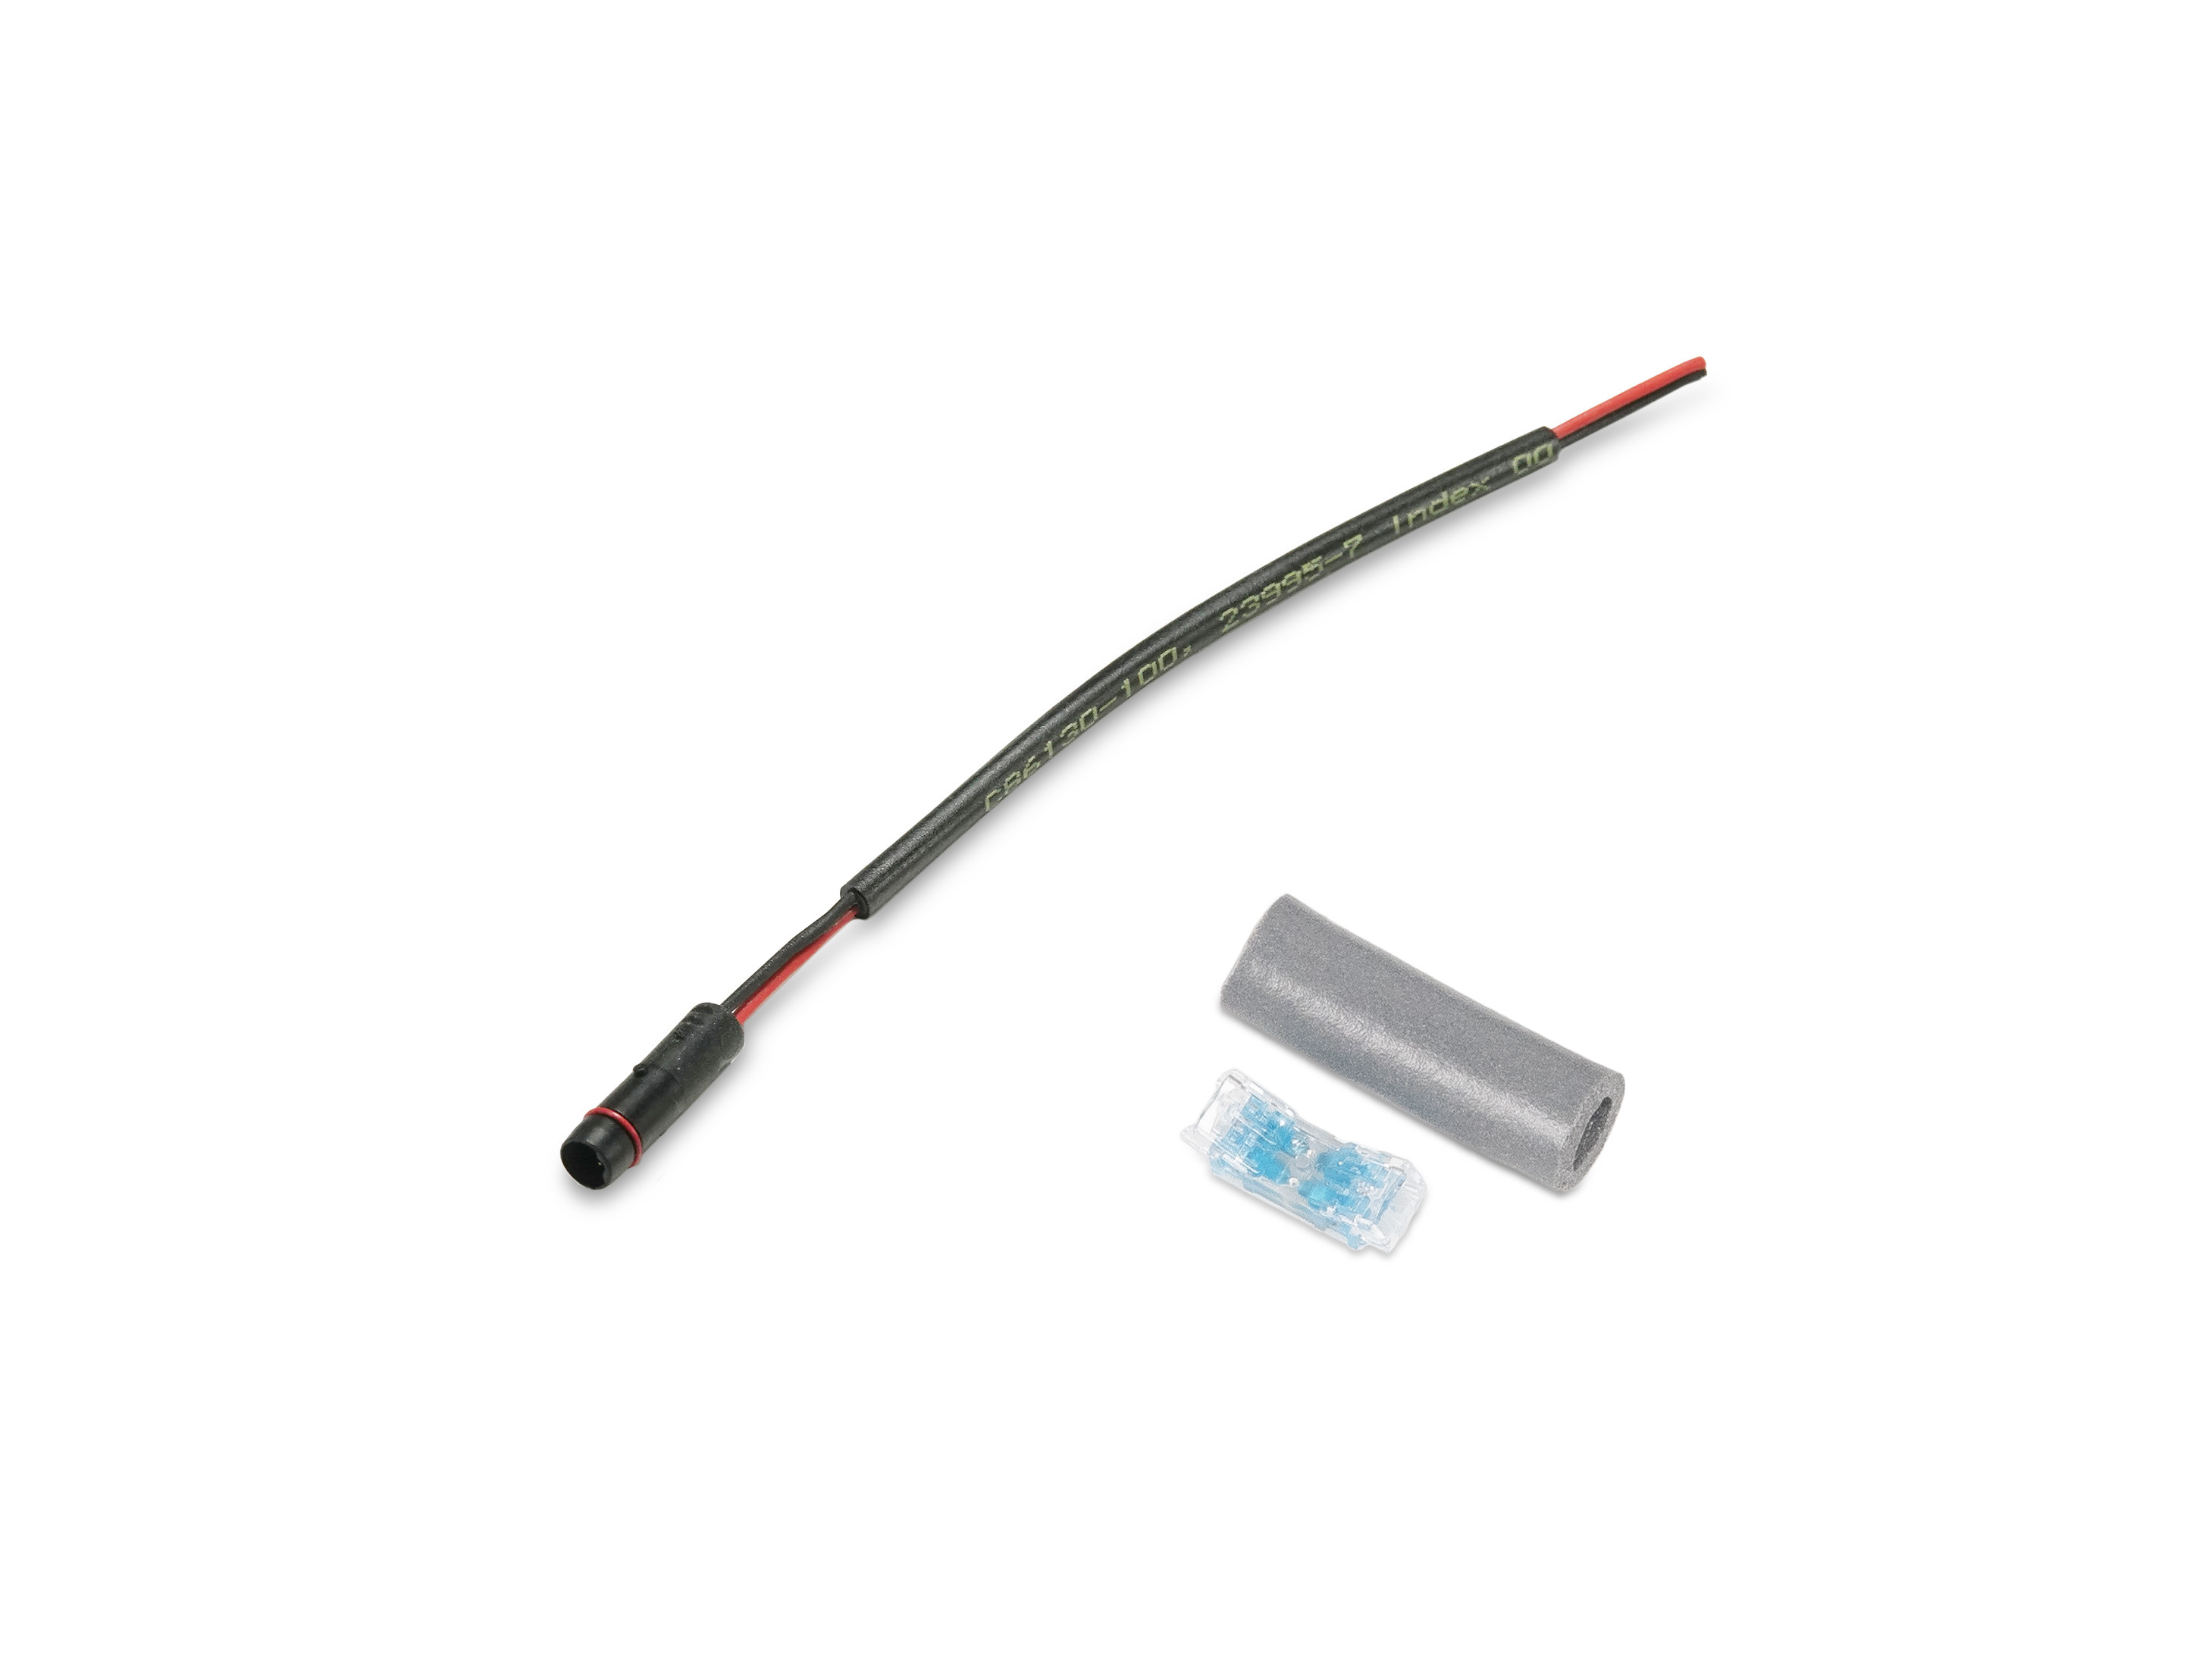 Lightcable for E-Bikes (taillight)